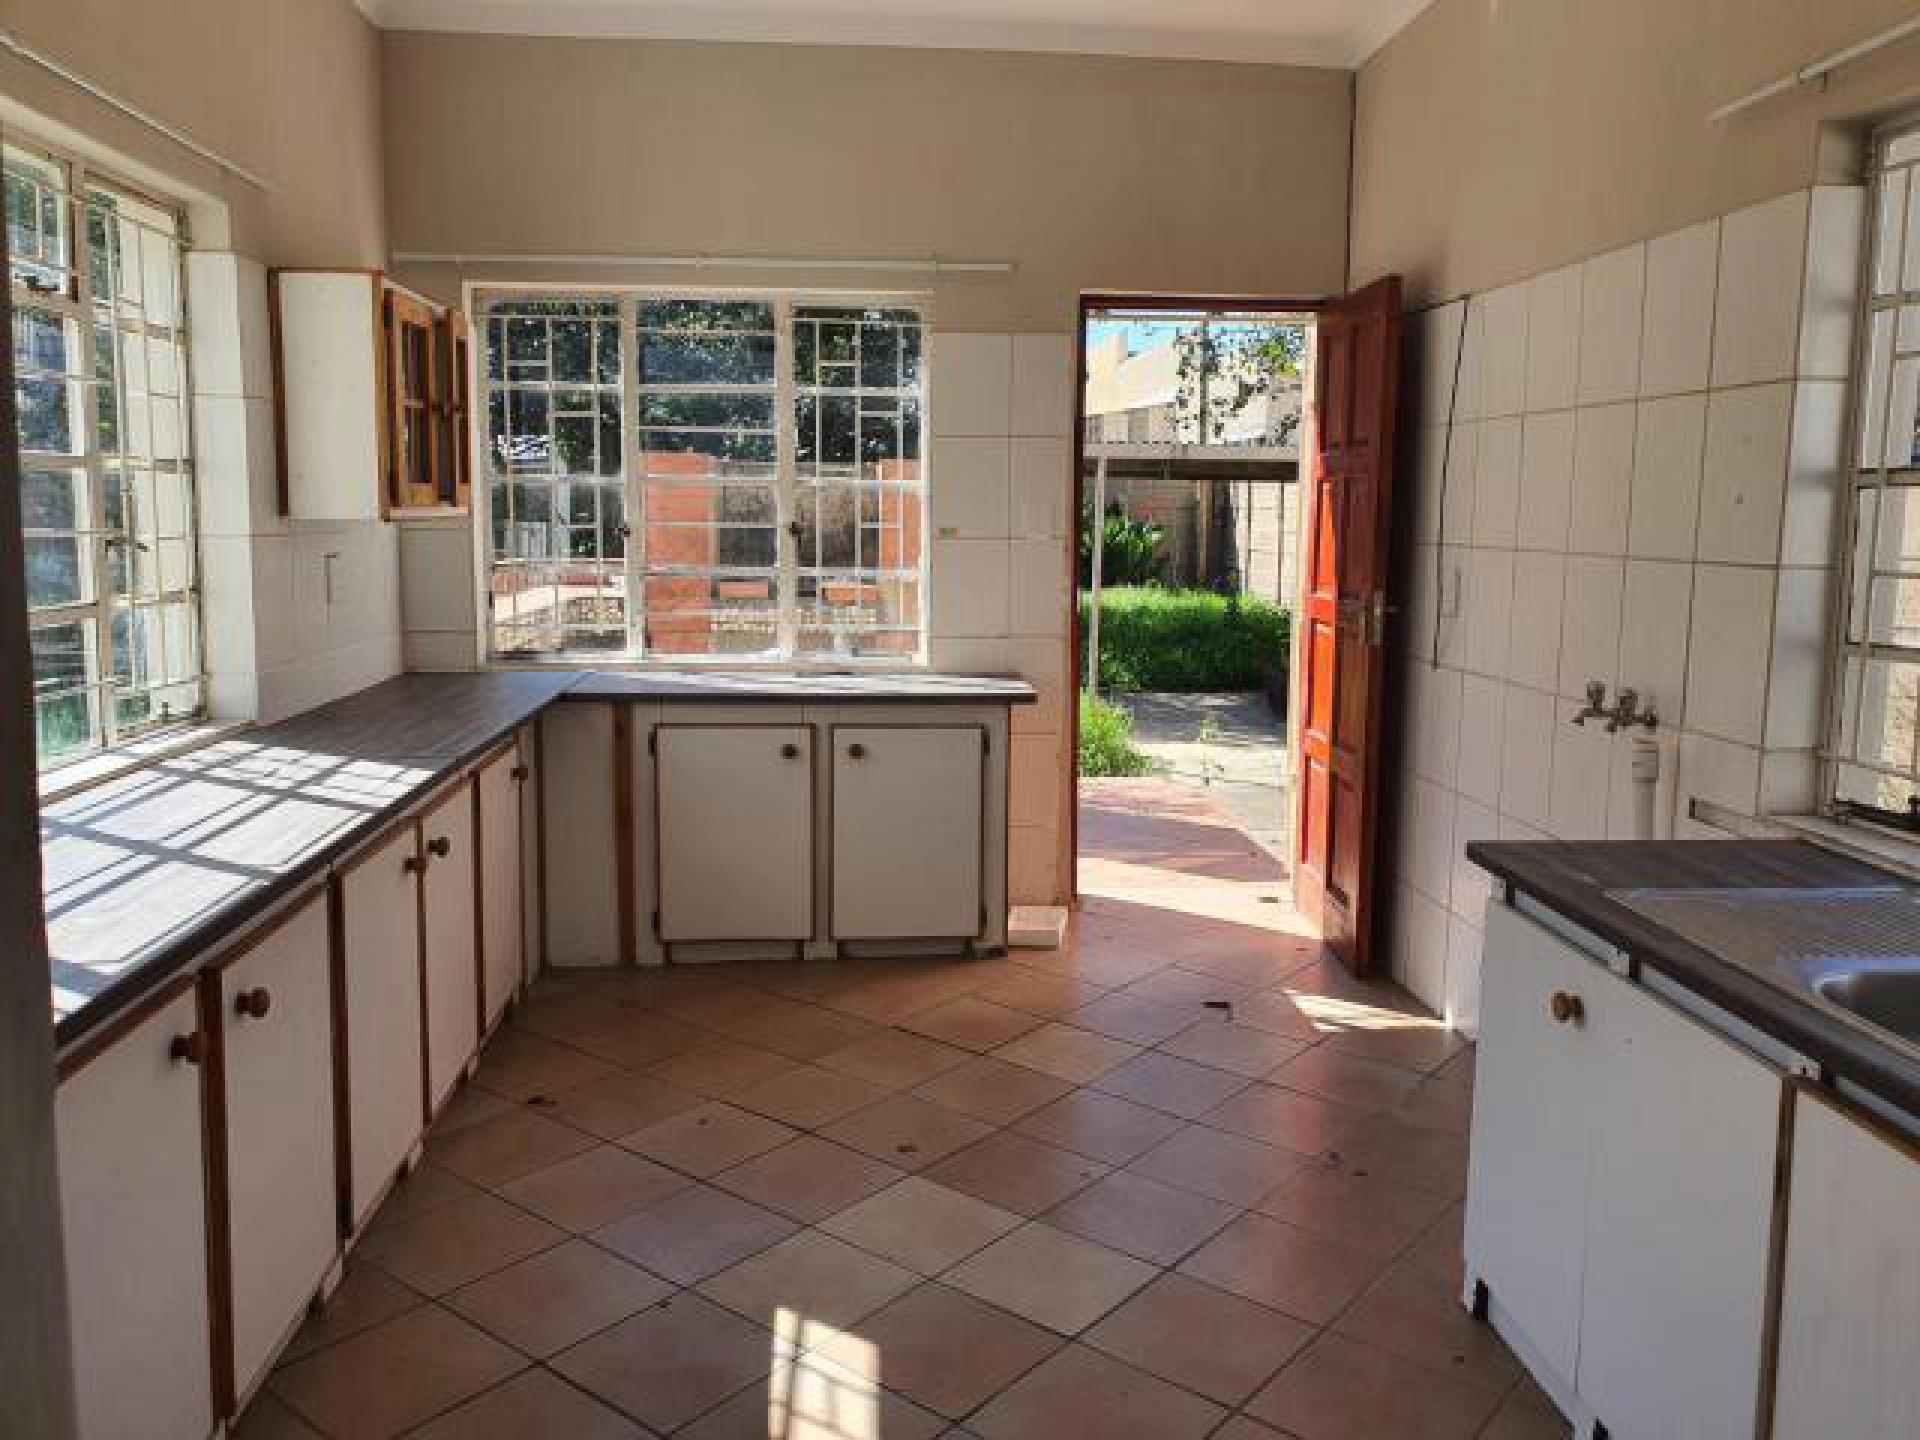 Kitchen of property in Miederpark